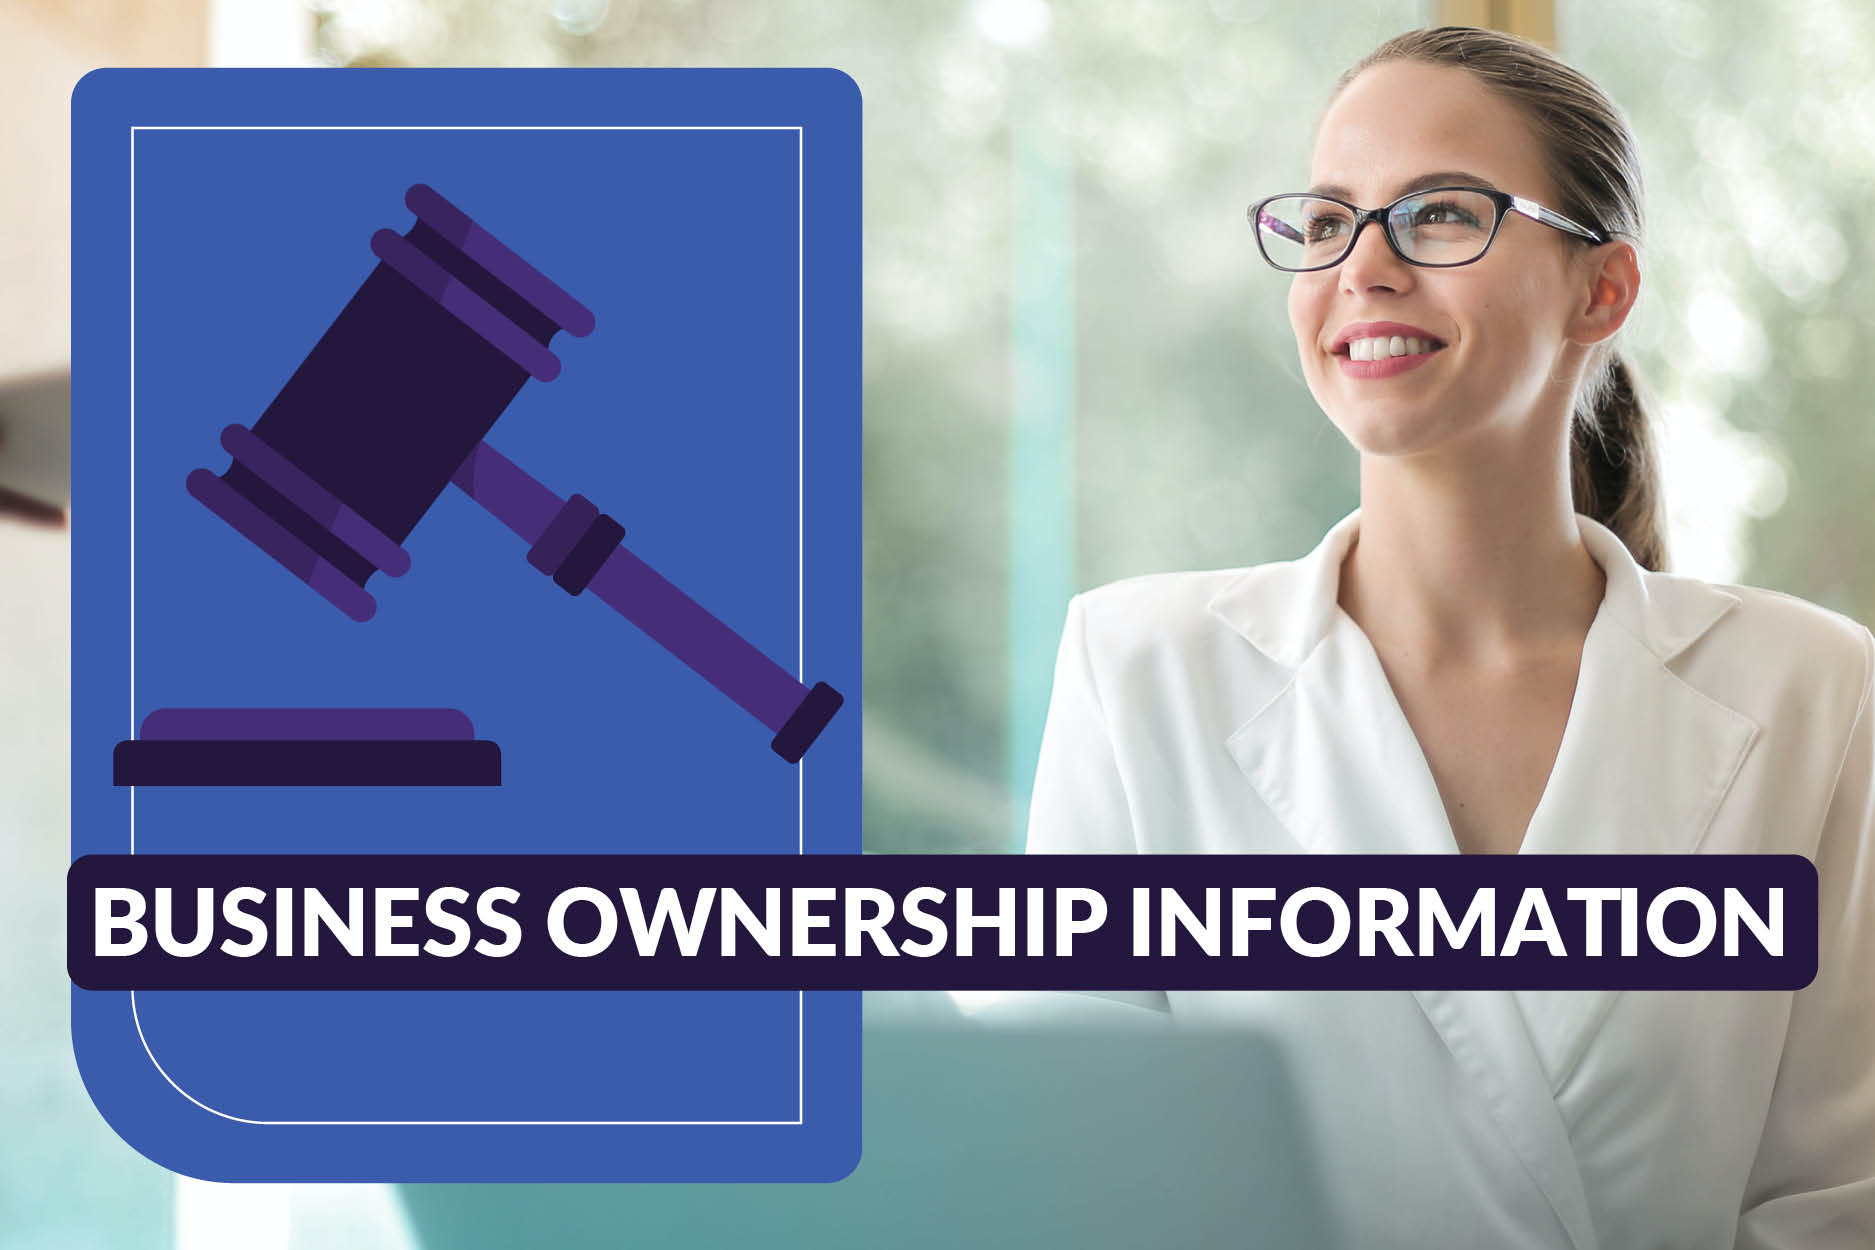 Illustration of a gavel and a business owner smiling and sharing documents with text "Business ownership information"